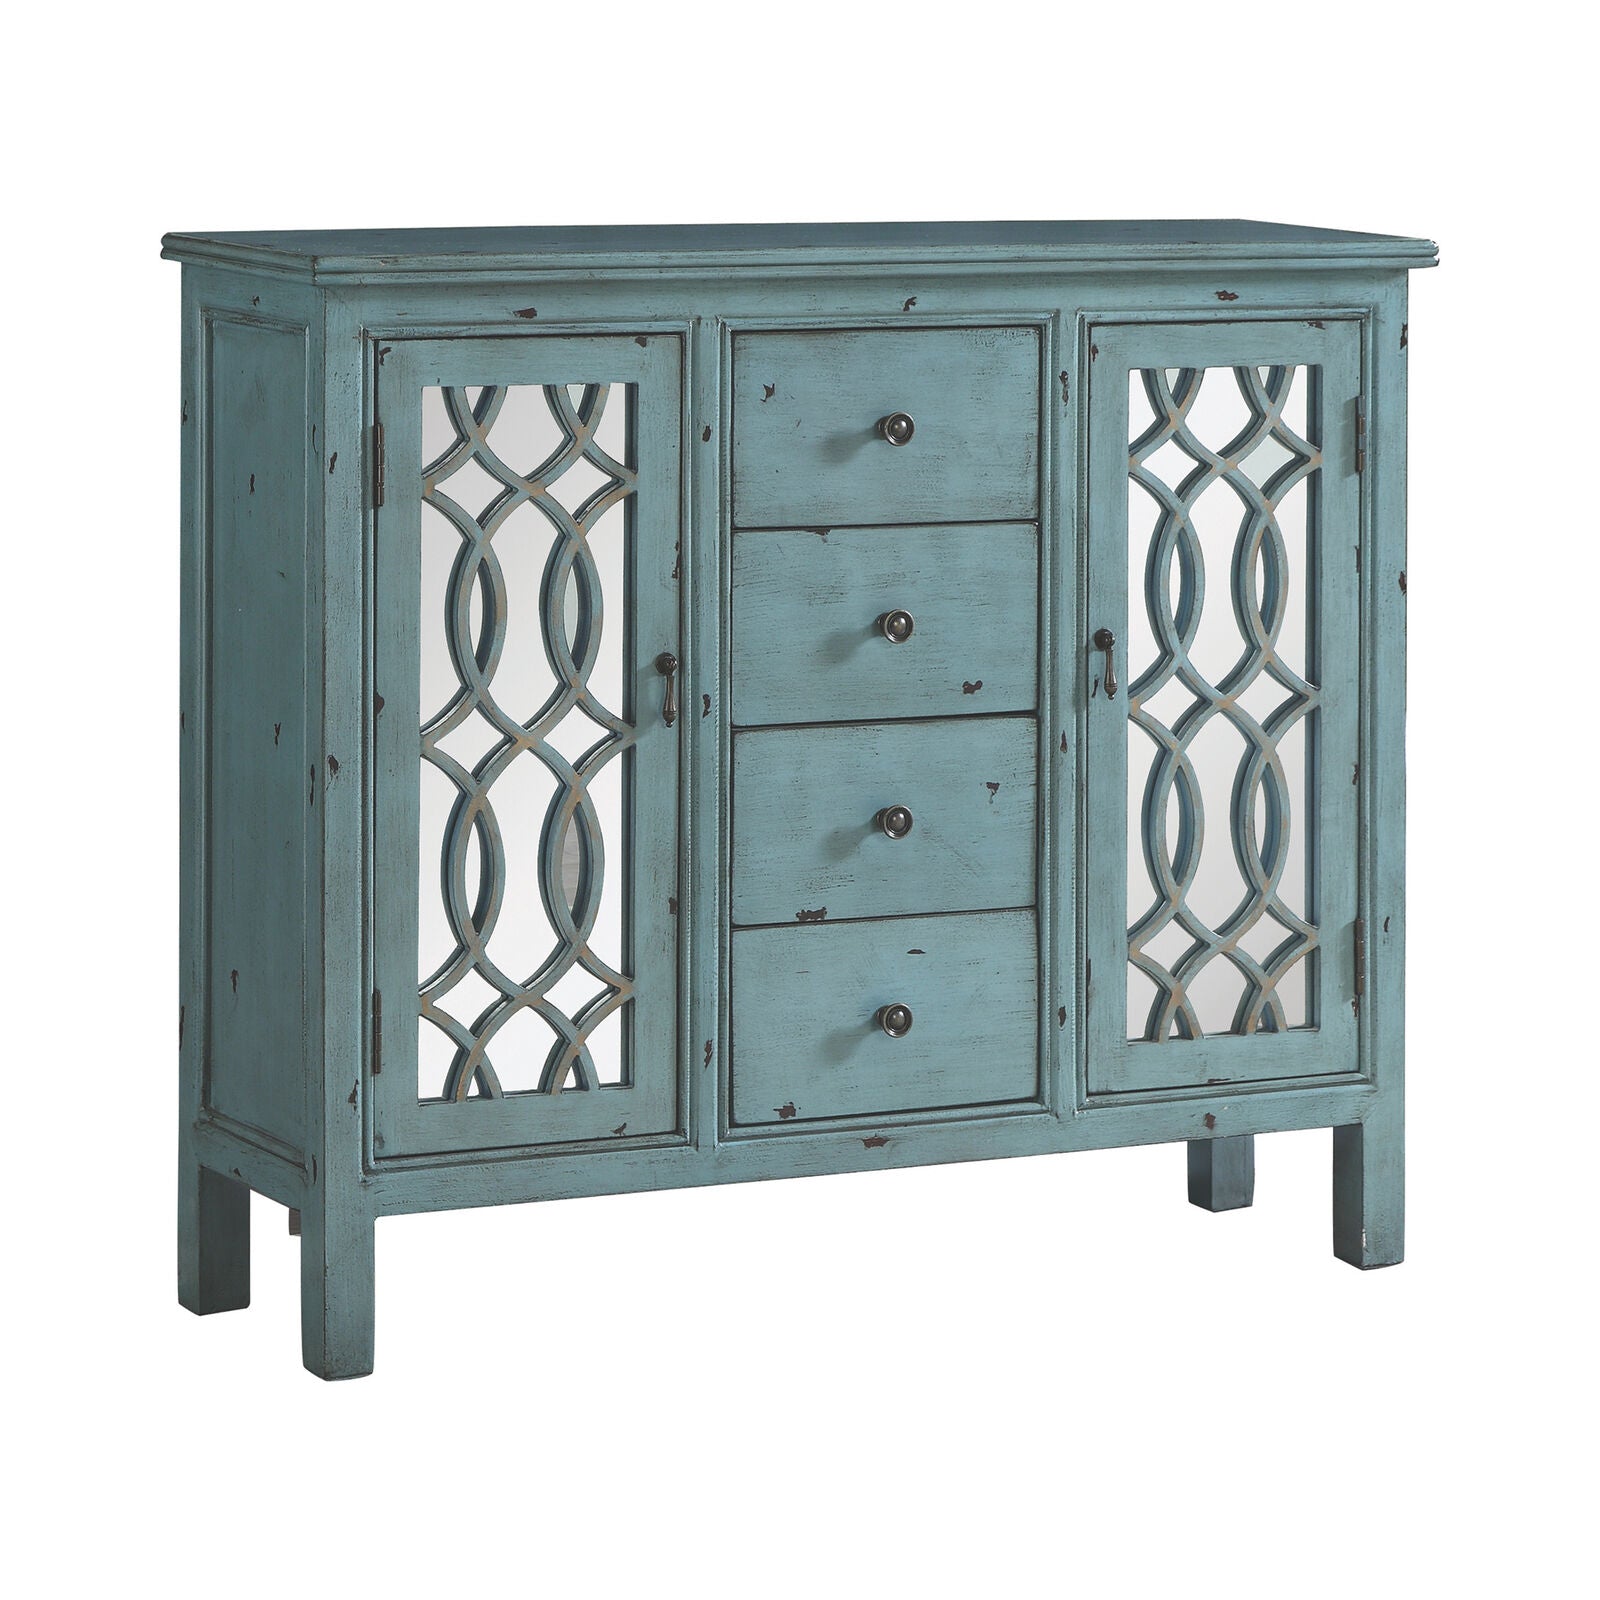 4-Drawer French Country Rustic Style Accent Cabinet Antique Blue 950736